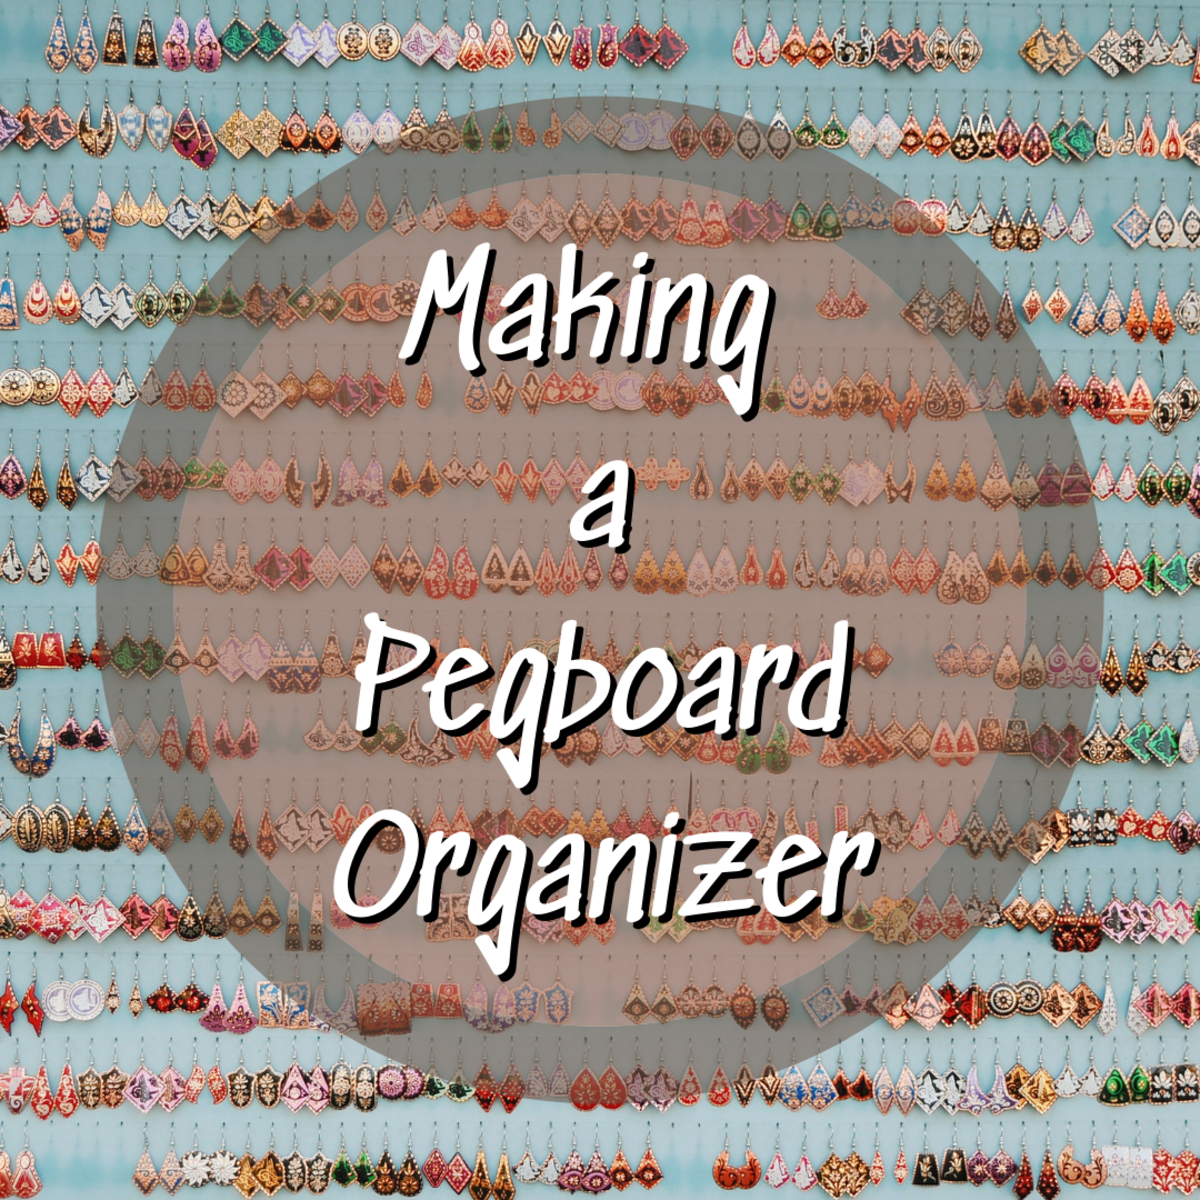 Learn how to create and use your own pegboard organizer!